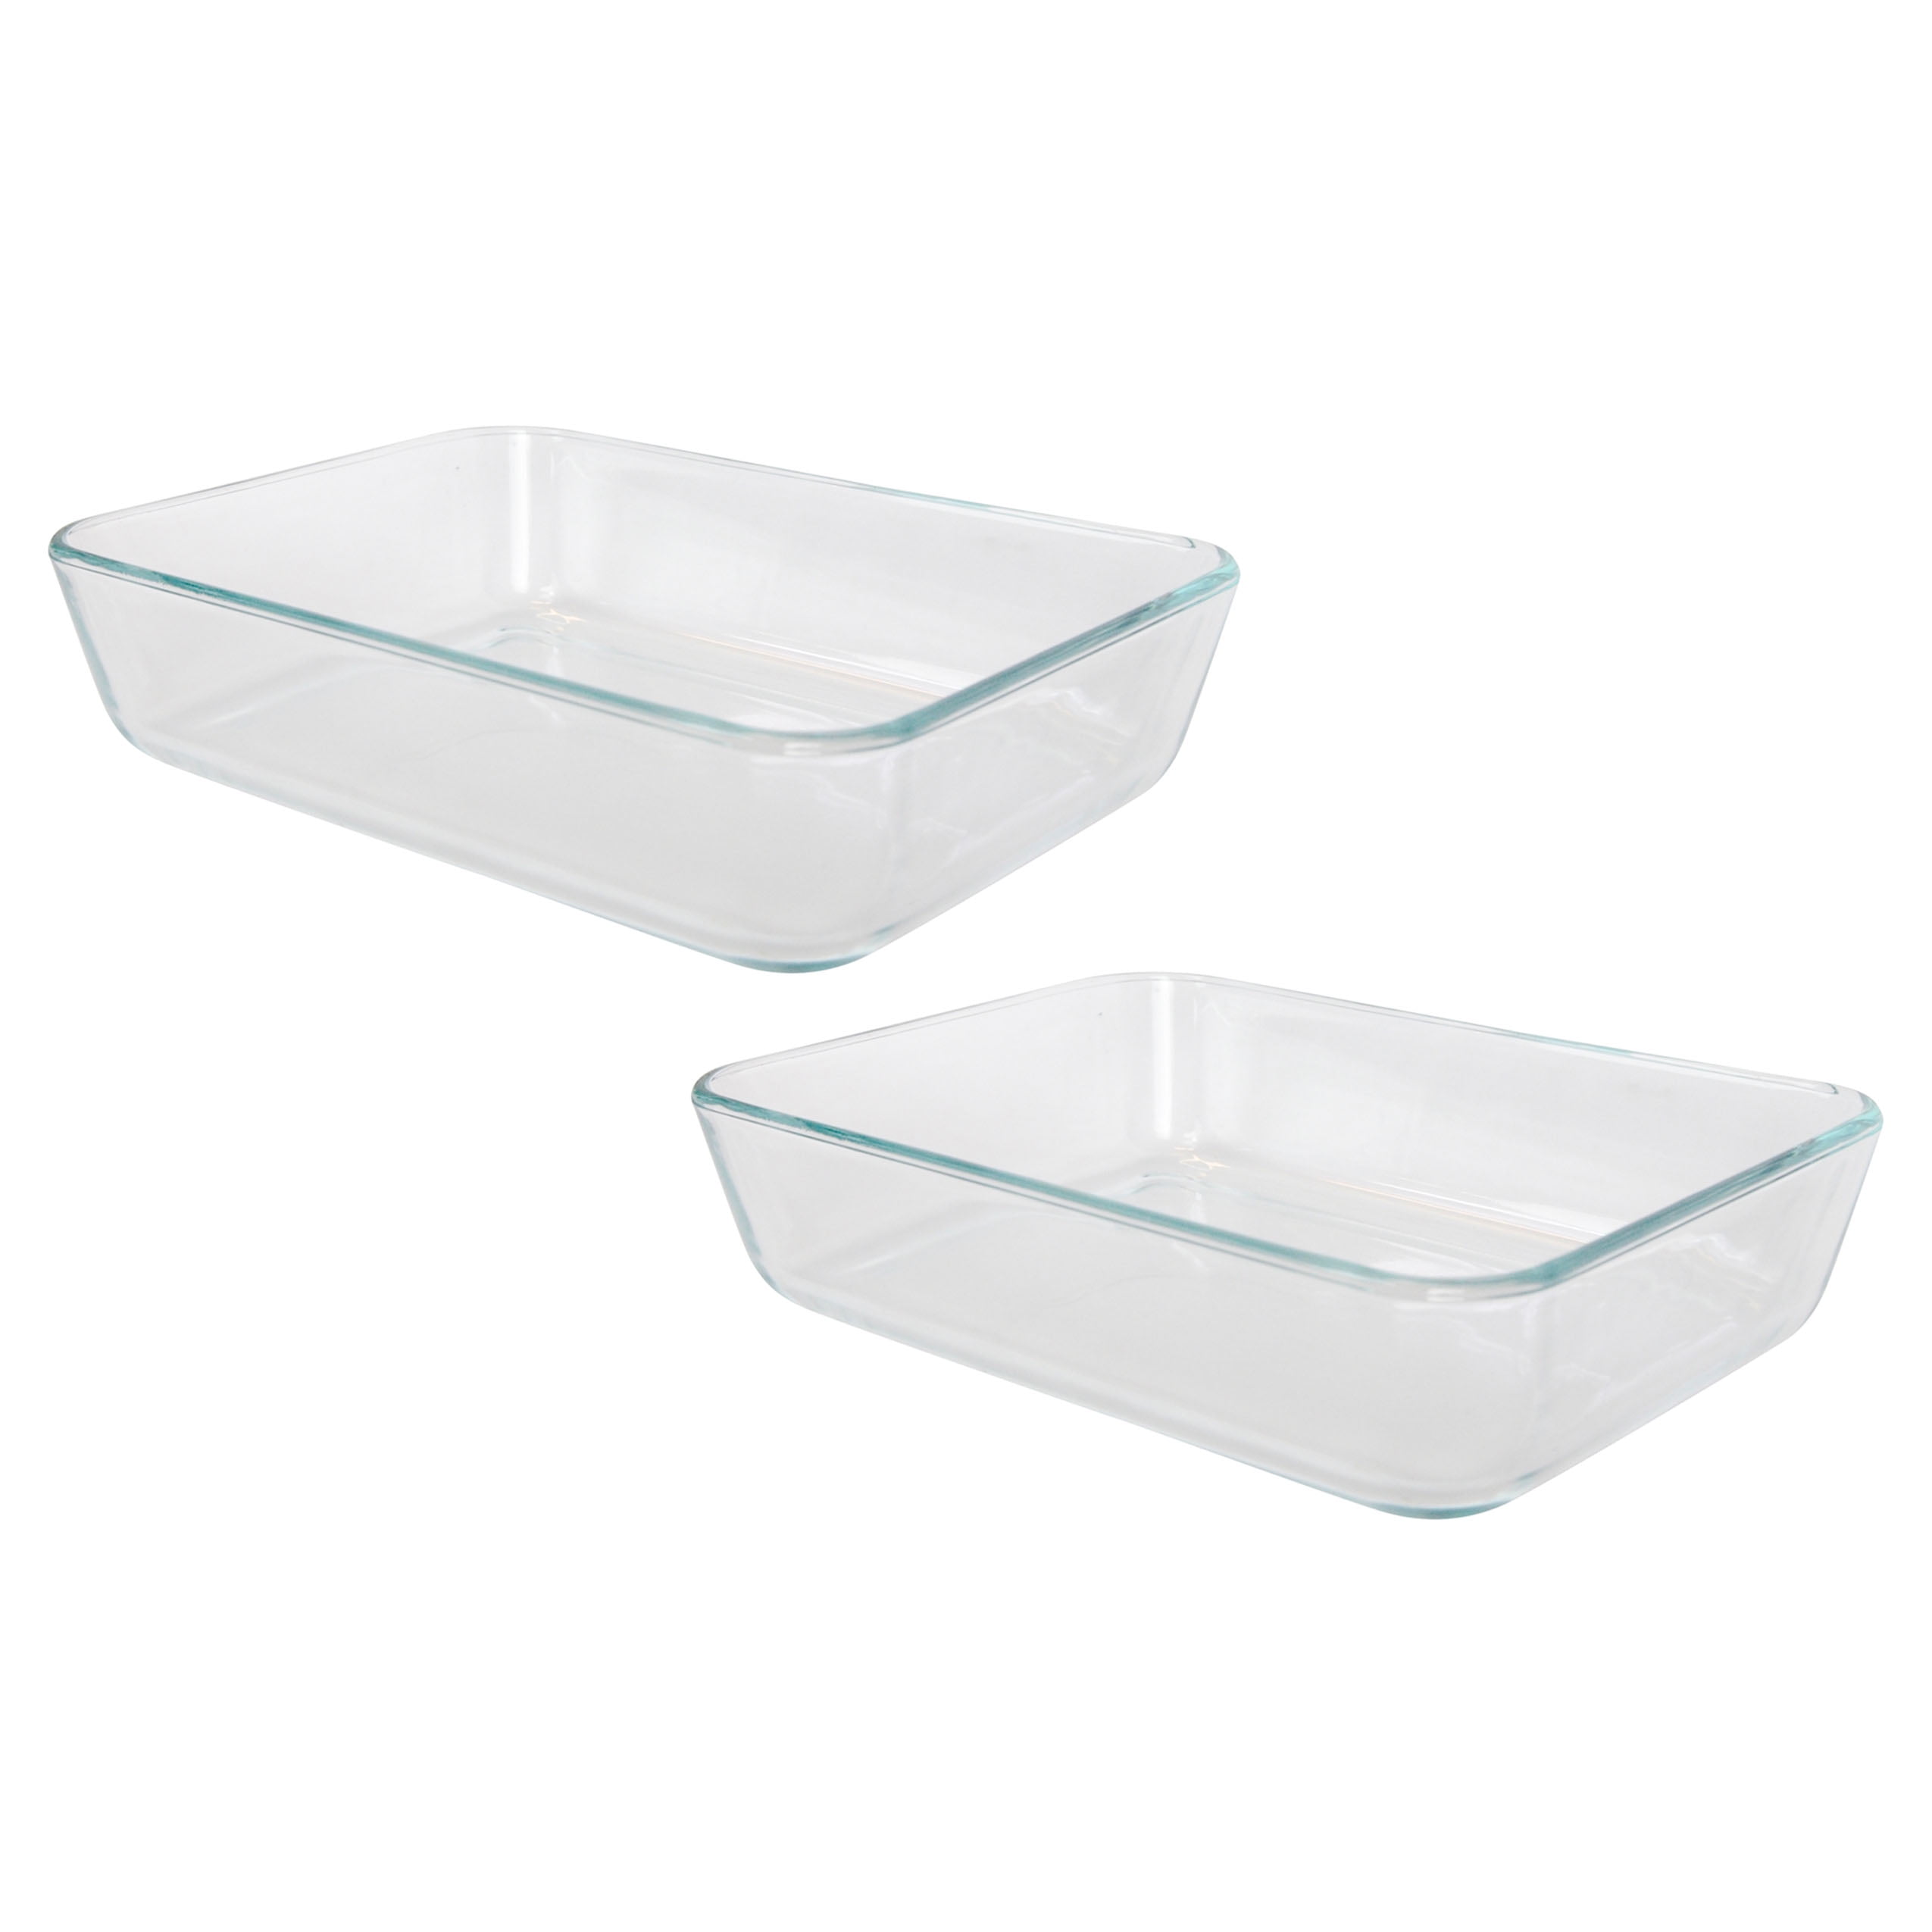 Pyrex 7202 2 Cup Clear Glass Bowl with 7202-PC Turquoise Plastic Lid, Made  in USA - 2 Pack Made in the USA